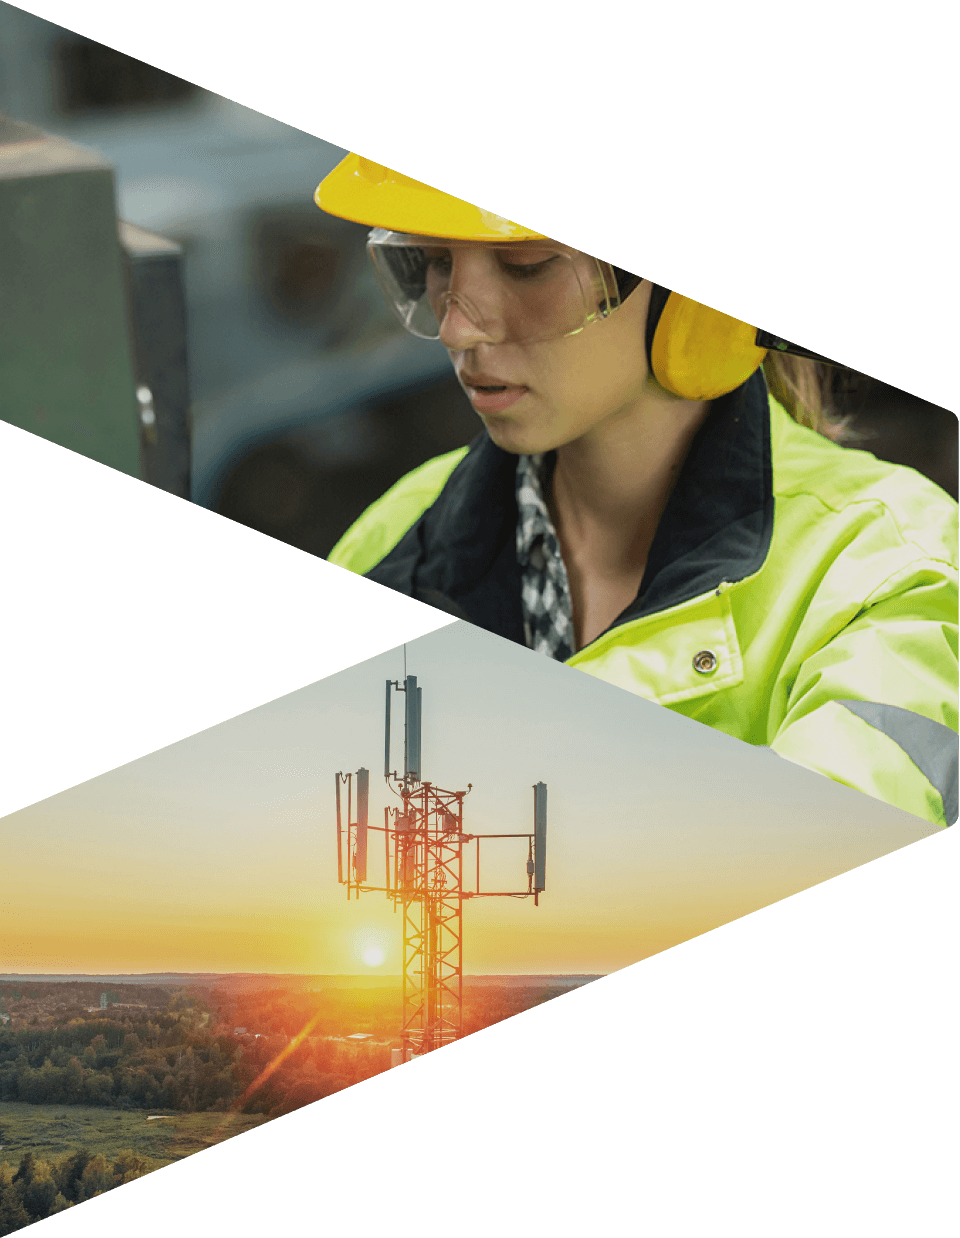 Arrow graphic with an industrial worker a telecommunications tower